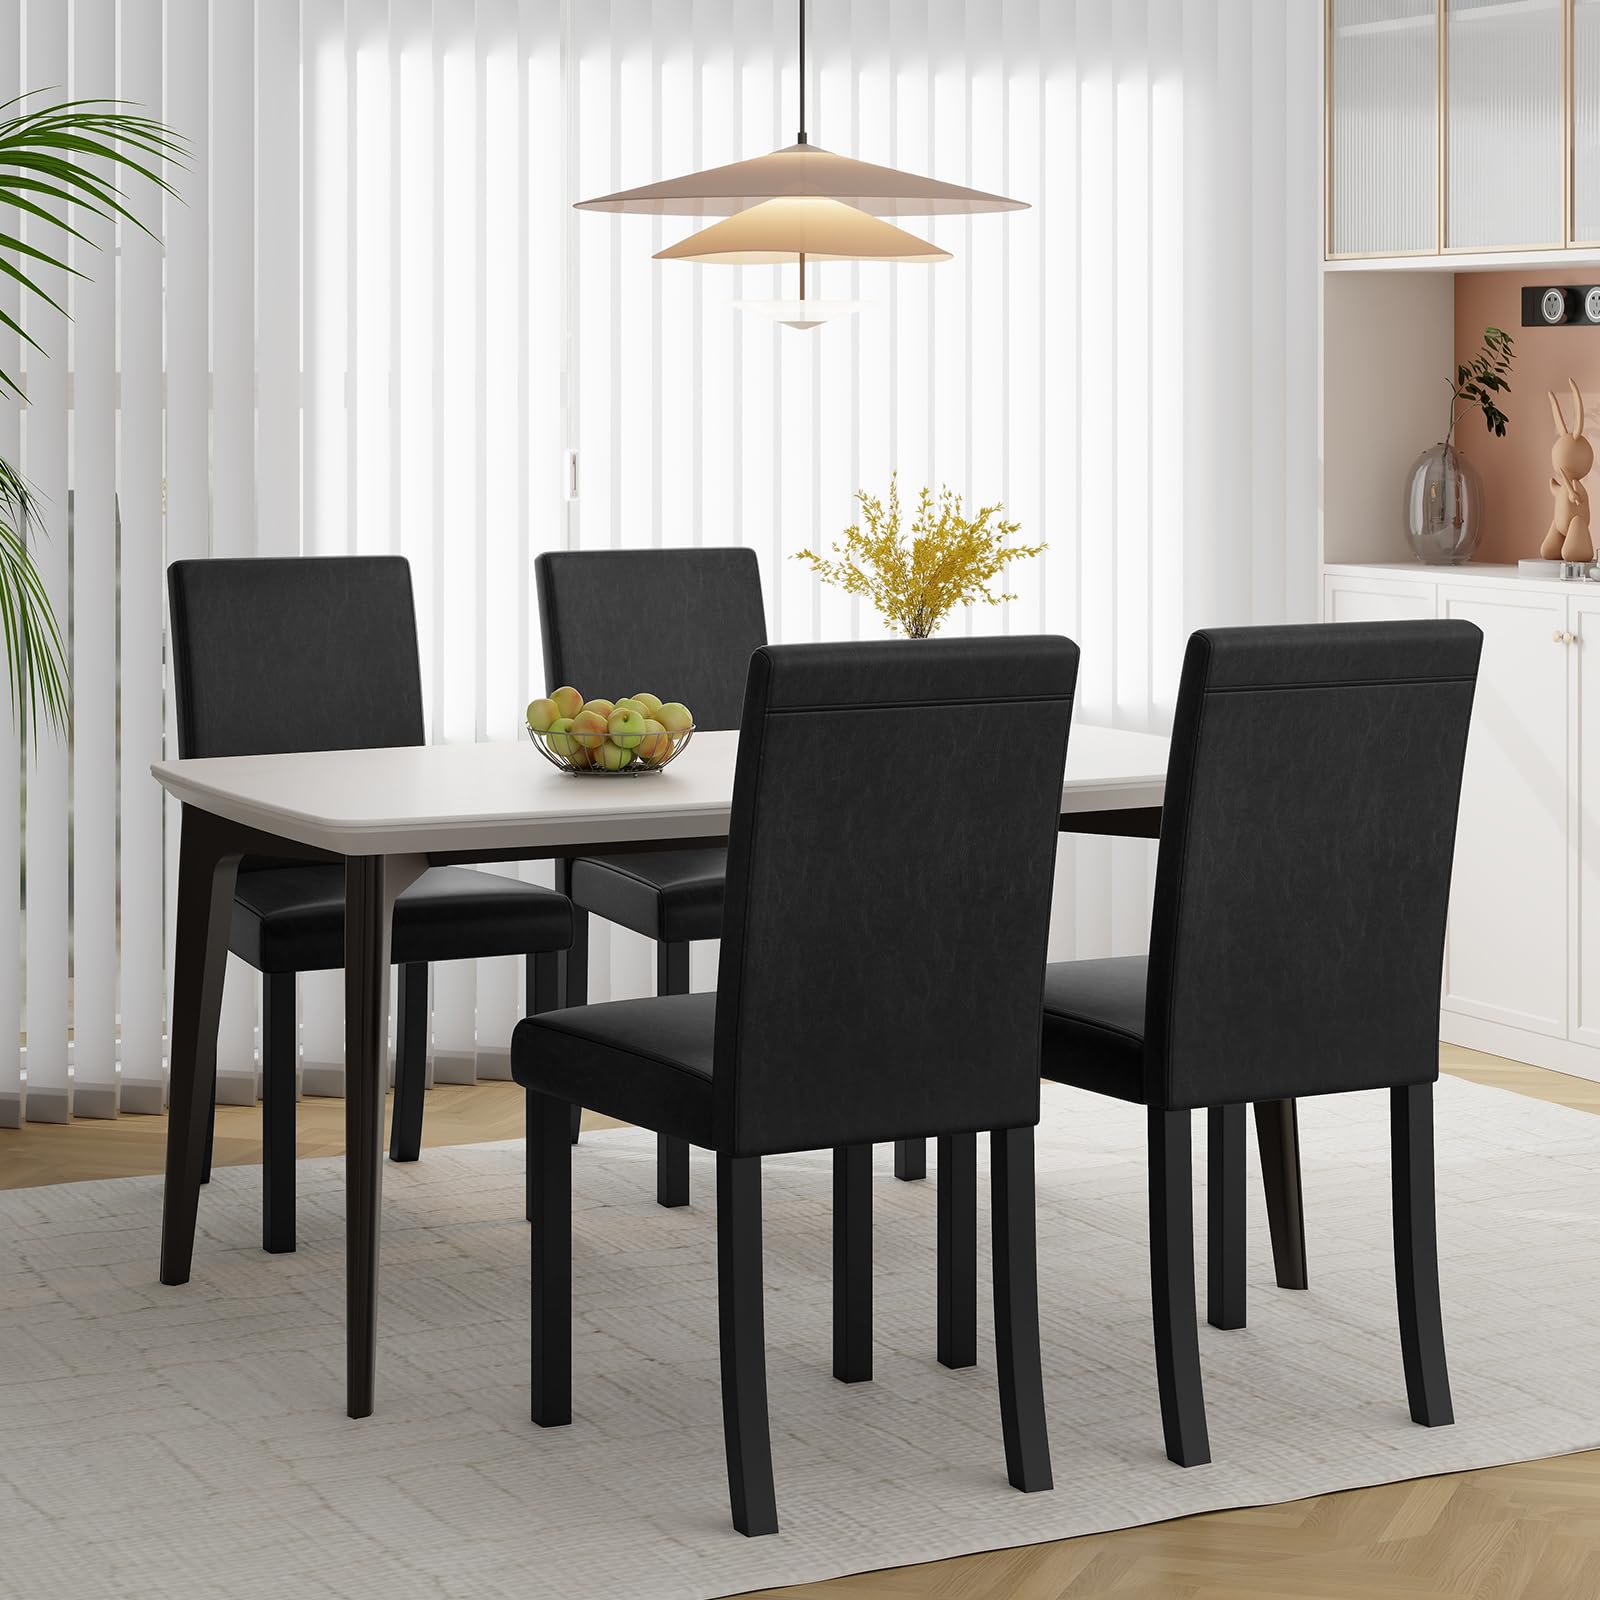 Giantex Dining Chairs Set of 4, Upholstered Kitchen Dinette Chairs w/Wood Frame